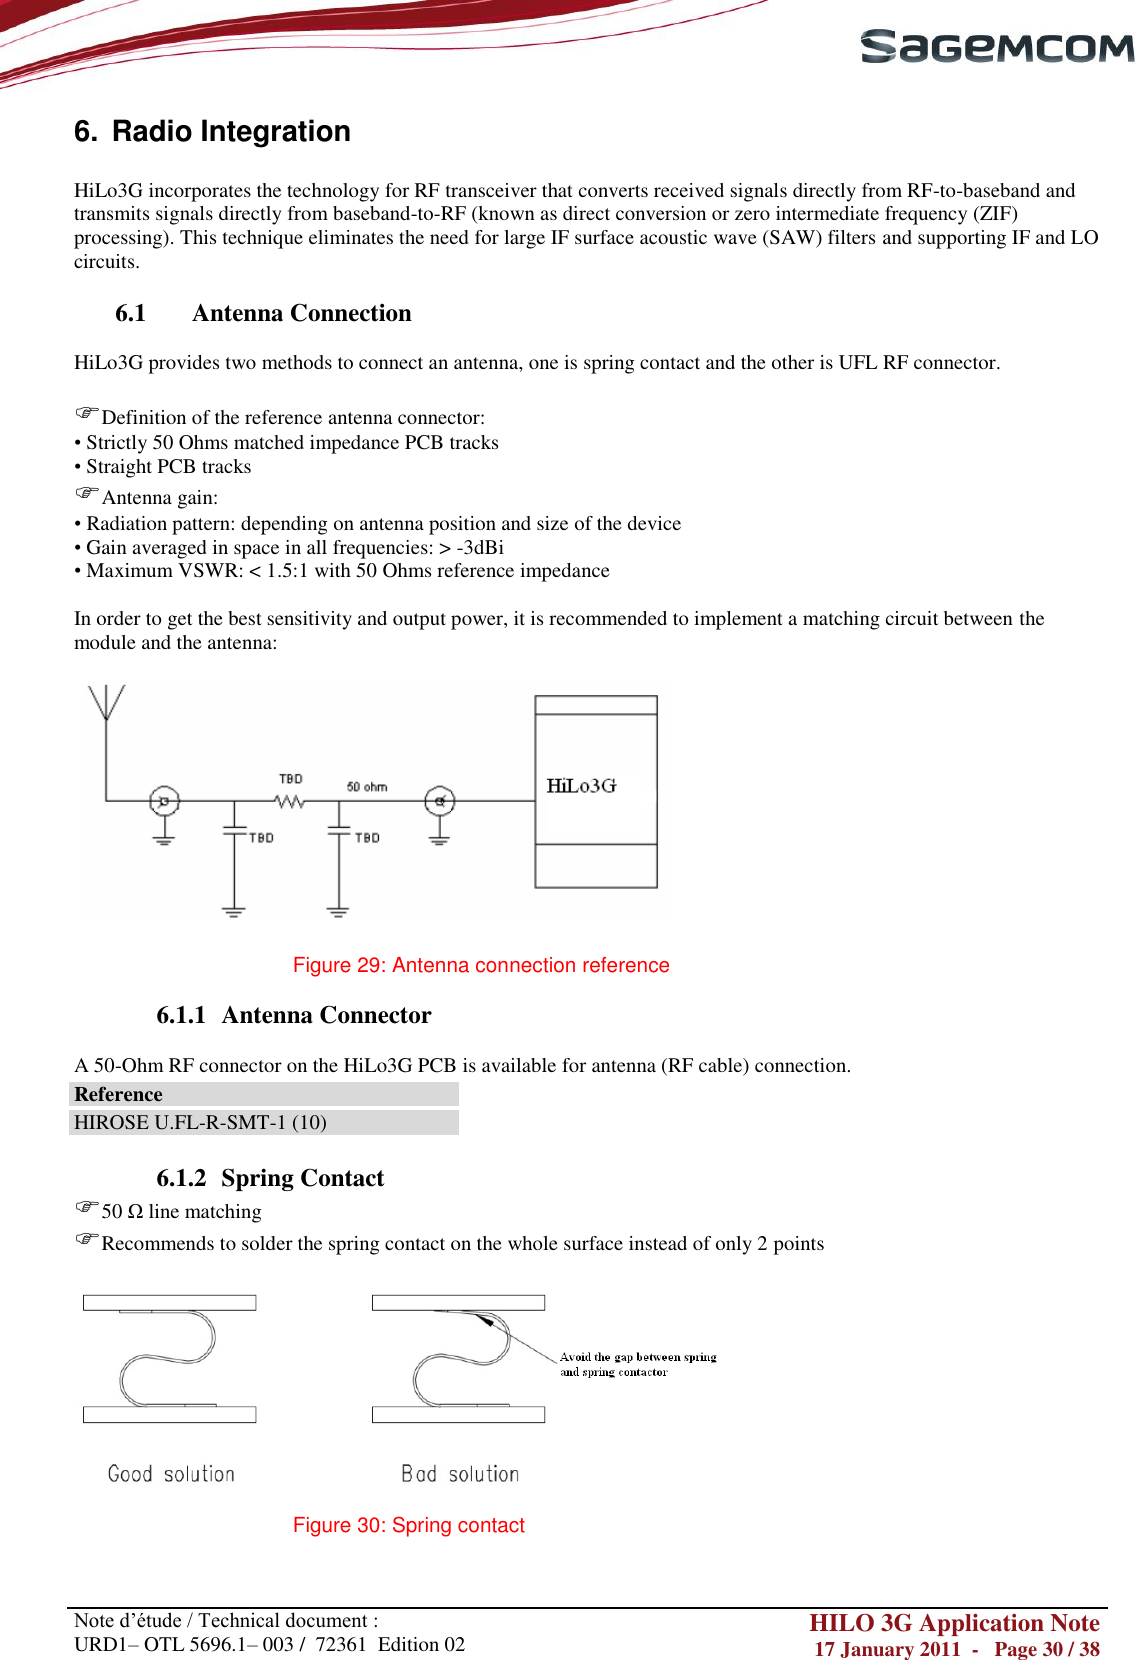       Note d‘étude / Technical document : URD1– OTL 5696.1– 003 /  72361  Edition 02 HILO 3G Application Note 17 January 2011  -   Page 30 / 38    6.  Radio Integration  HiLo3G incorporates the technology for RF transceiver that converts received signals directly from RF-to-baseband and transmits signals directly from baseband-to-RF (known as direct conversion or zero intermediate frequency (ZIF) processing). This technique eliminates the need for large IF surface acoustic wave (SAW) filters and supporting IF and LO circuits.  6.1 Antenna Connection  HiLo3G provides two methods to connect an antenna, one is spring contact and the other is UFL RF connector.  Definition of the reference antenna connector: • Strictly 50 Ohms matched impedance PCB tracks • Straight PCB tracks Antenna gain: • Radiation pattern: depending on antenna position and size of the device • Gain averaged in space in all frequencies: &gt; -3dBi • Maximum VSWR: &lt; 1.5:1 with 50 Ohms reference impedance  In order to get the best sensitivity and output power, it is recommended to implement a matching circuit between the module and the antenna:    Figure 29: Antenna connection reference  6.1.1 Antenna Connector  A 50-Ohm RF connector on the HiLo3G PCB is available for antenna (RF cable) connection. Reference HIROSE U.FL-R-SMT-1 (10)  6.1.2 Spring Contact 50 Ω line matching  Recommends to solder the spring contact on the whole surface instead of only 2 points    Figure 30: Spring contact   